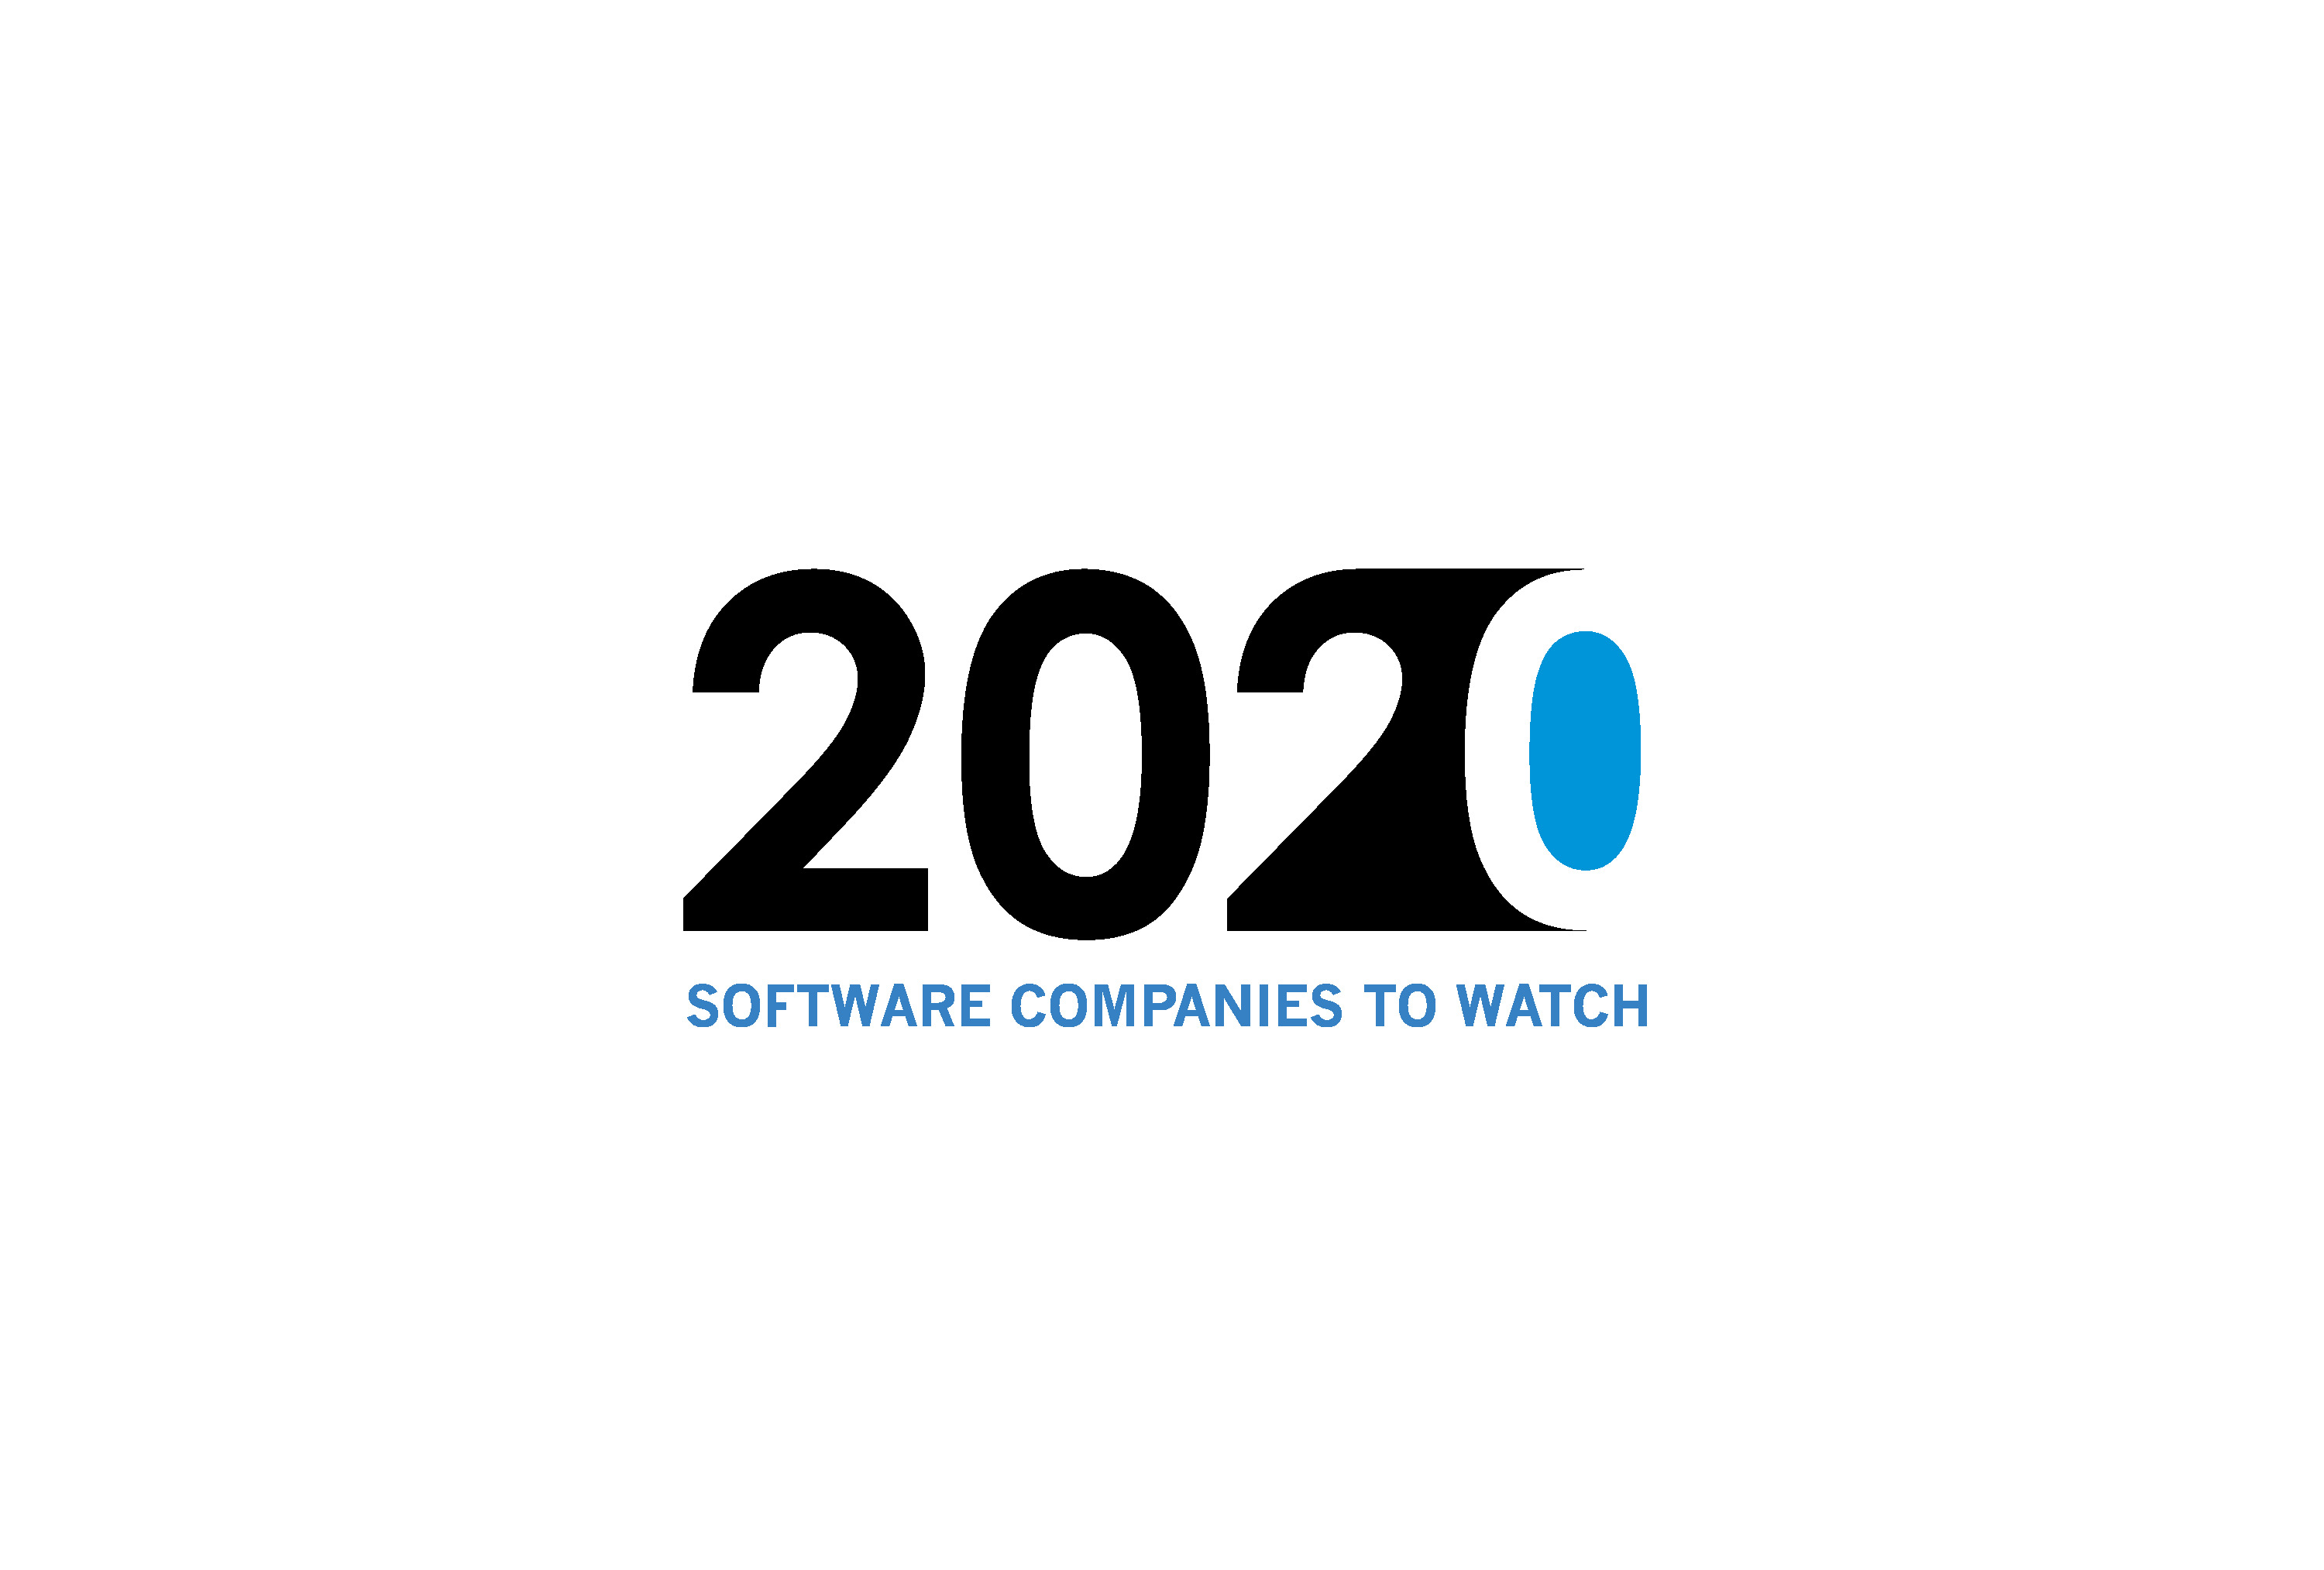 2020 Software Companies to Watch